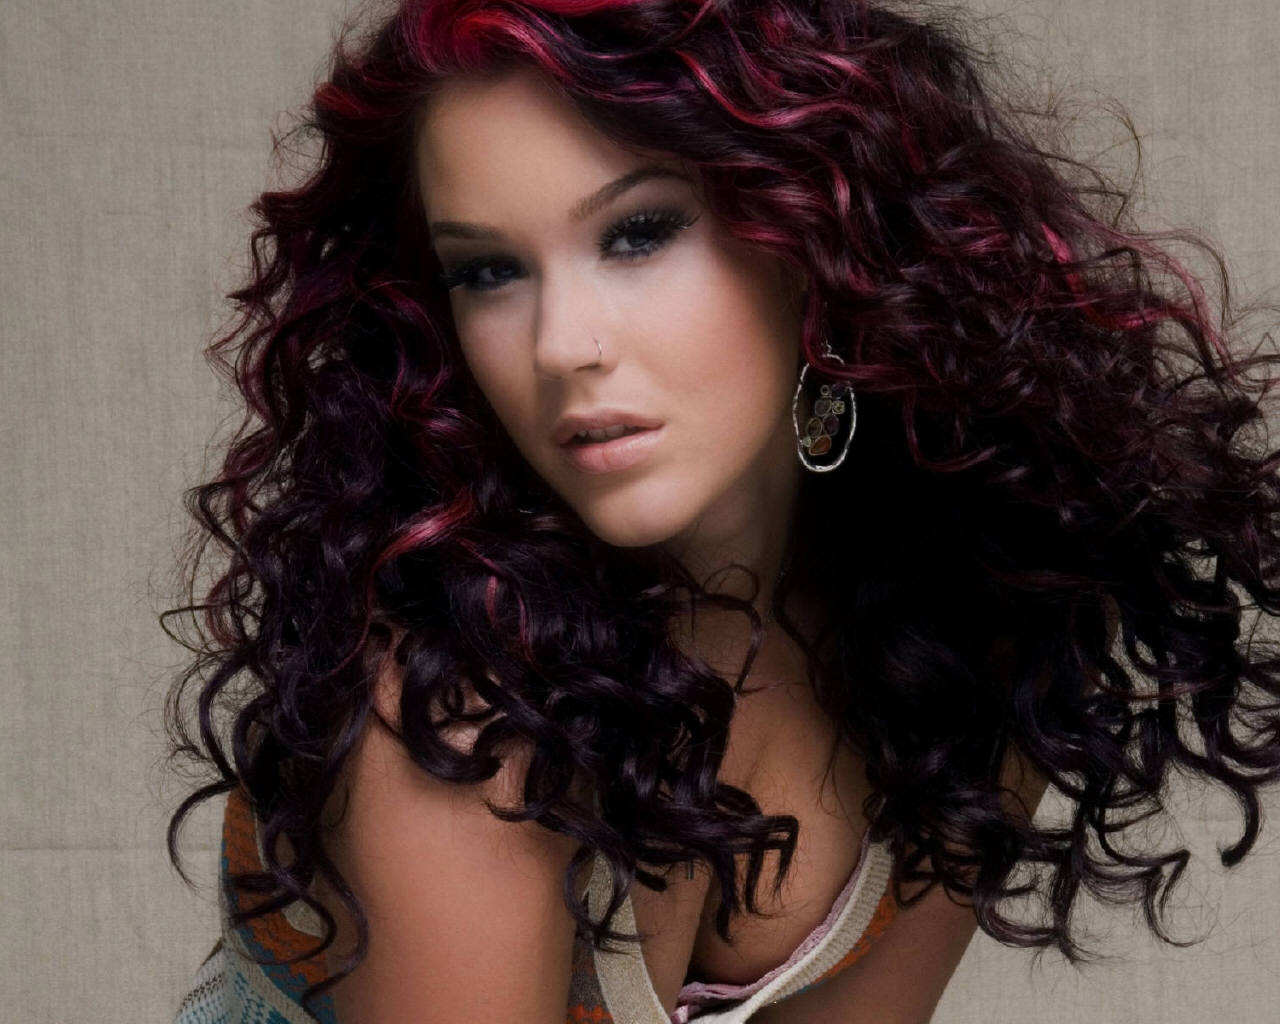 Free download Top Joss Stone Wallpaper 2012 Images for Pinterest